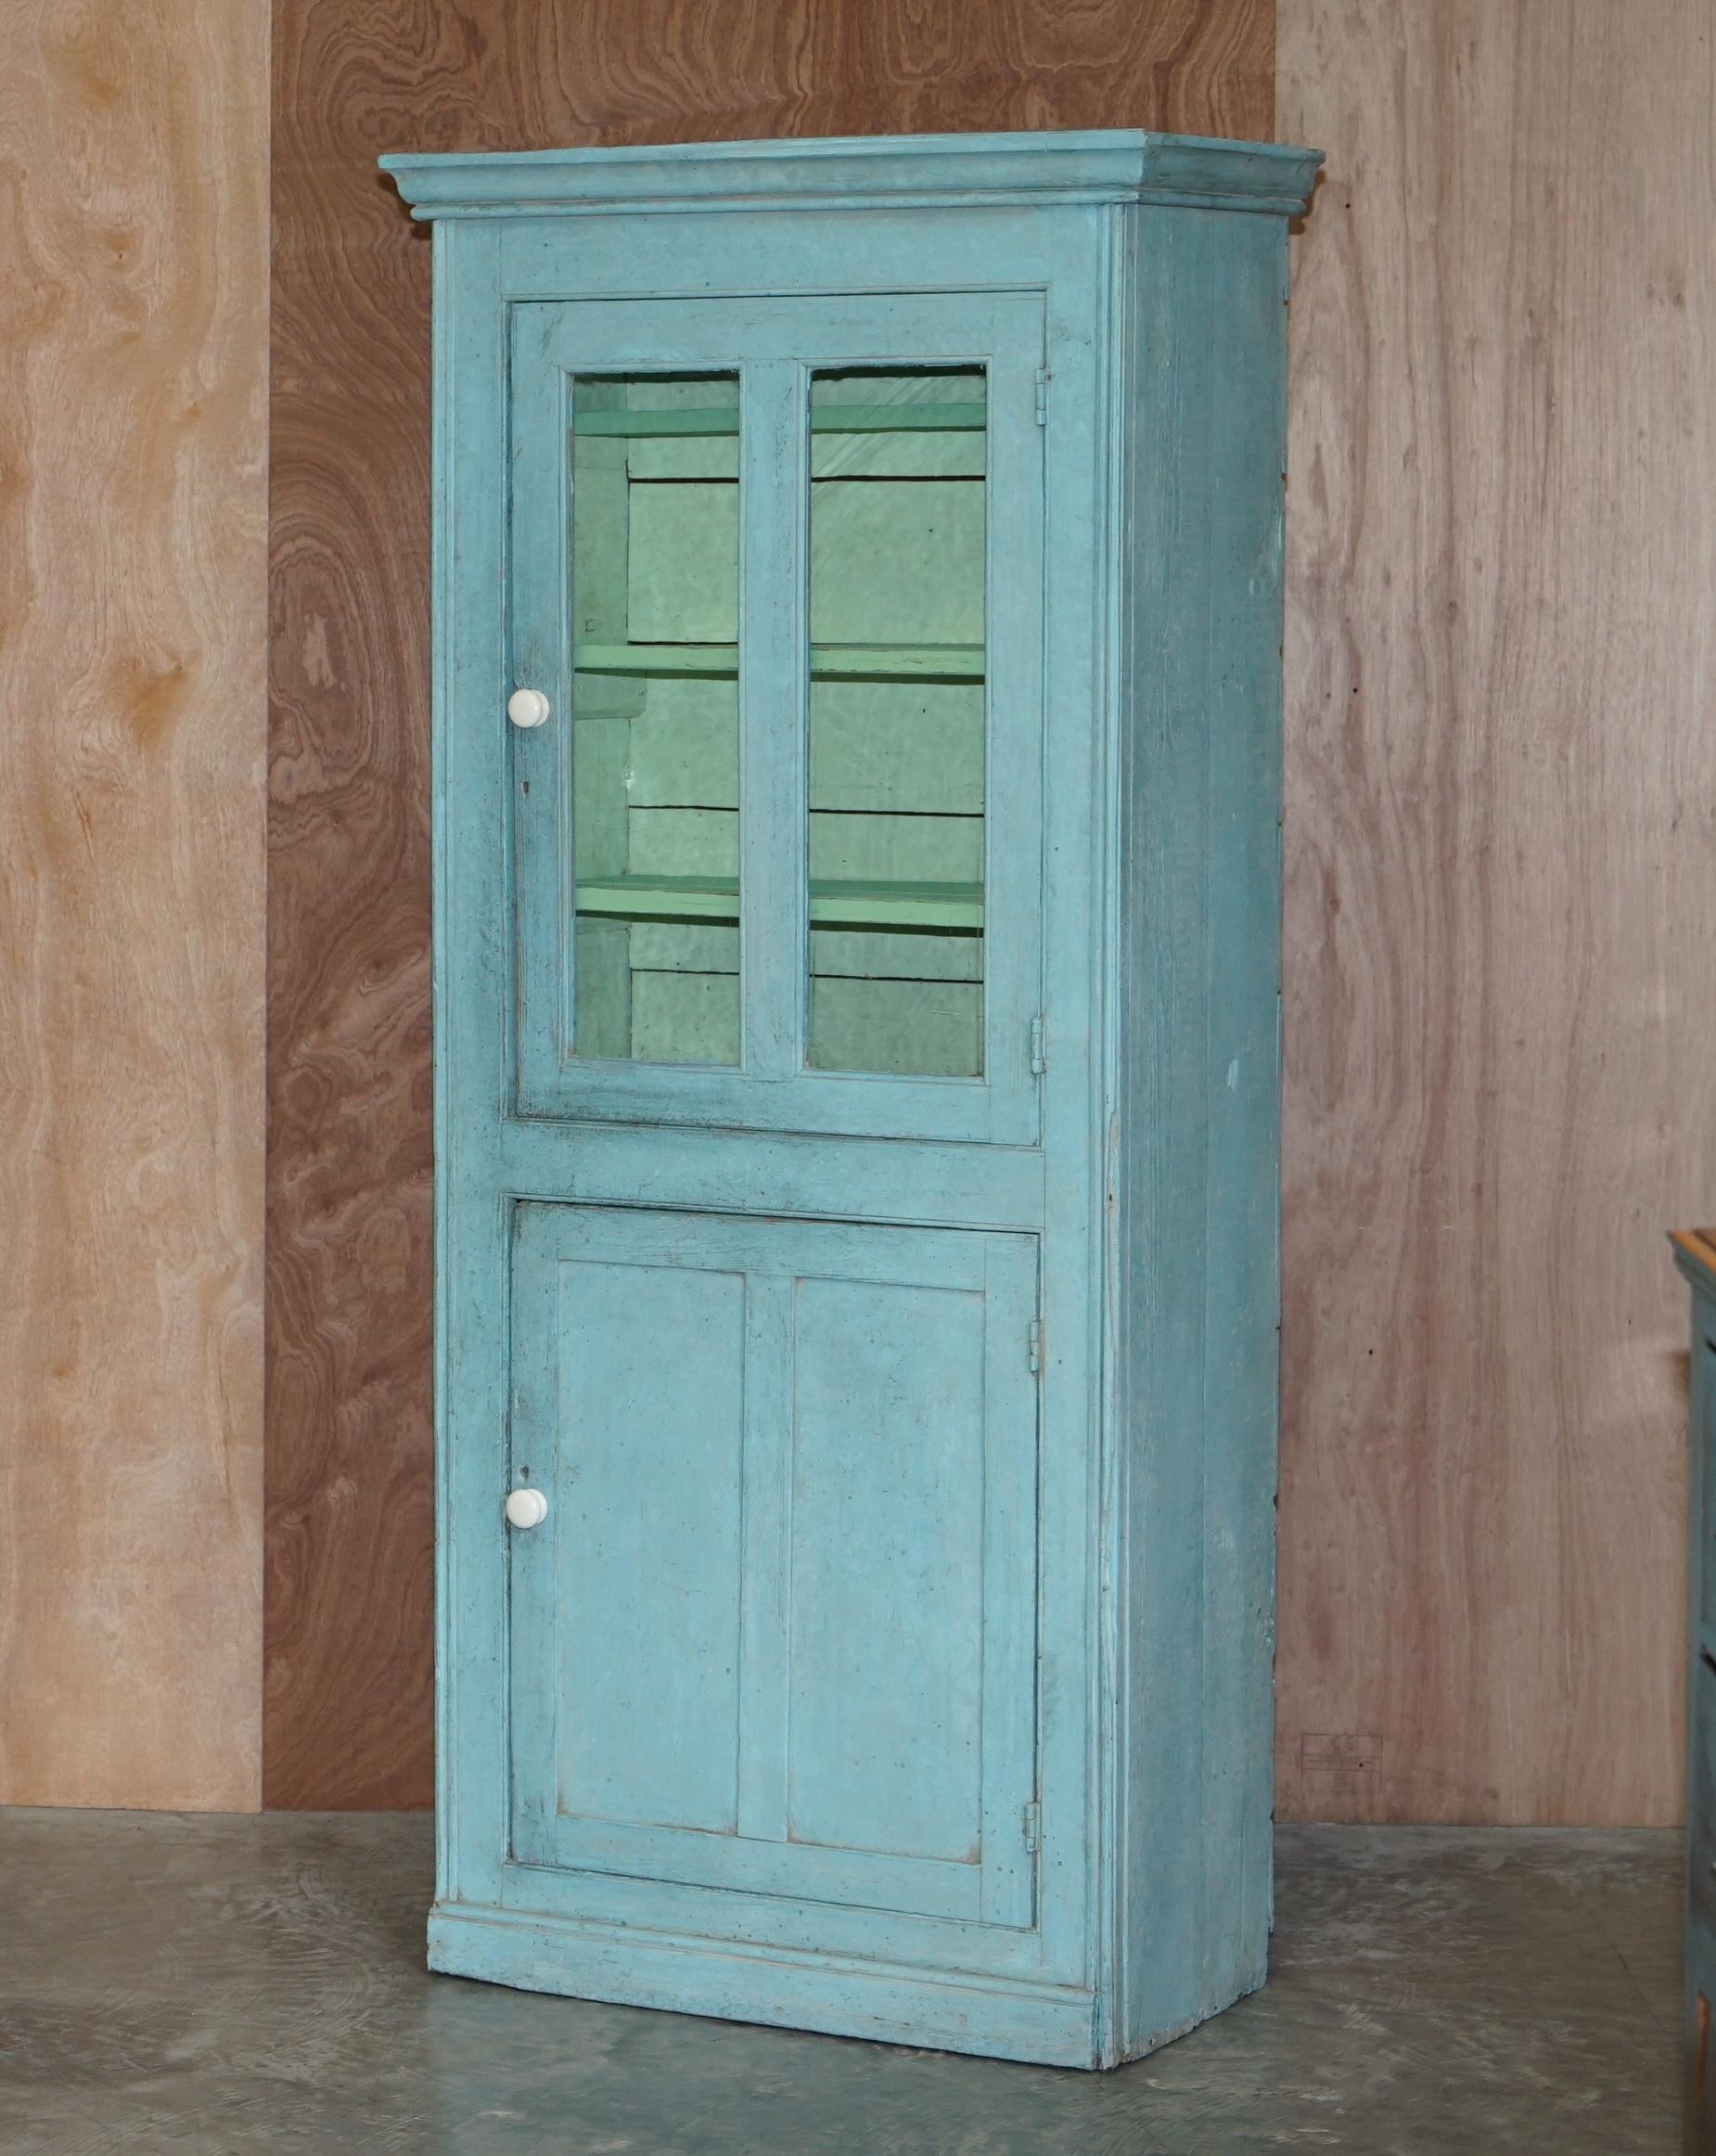 We are delighted to offer for sale this stunning highly collectable hand painted duck egg blue Victorian pine pot cupboard or bookcase

A very charming and highly collectable piece, the painting is beautifully aged and looks sublime in any